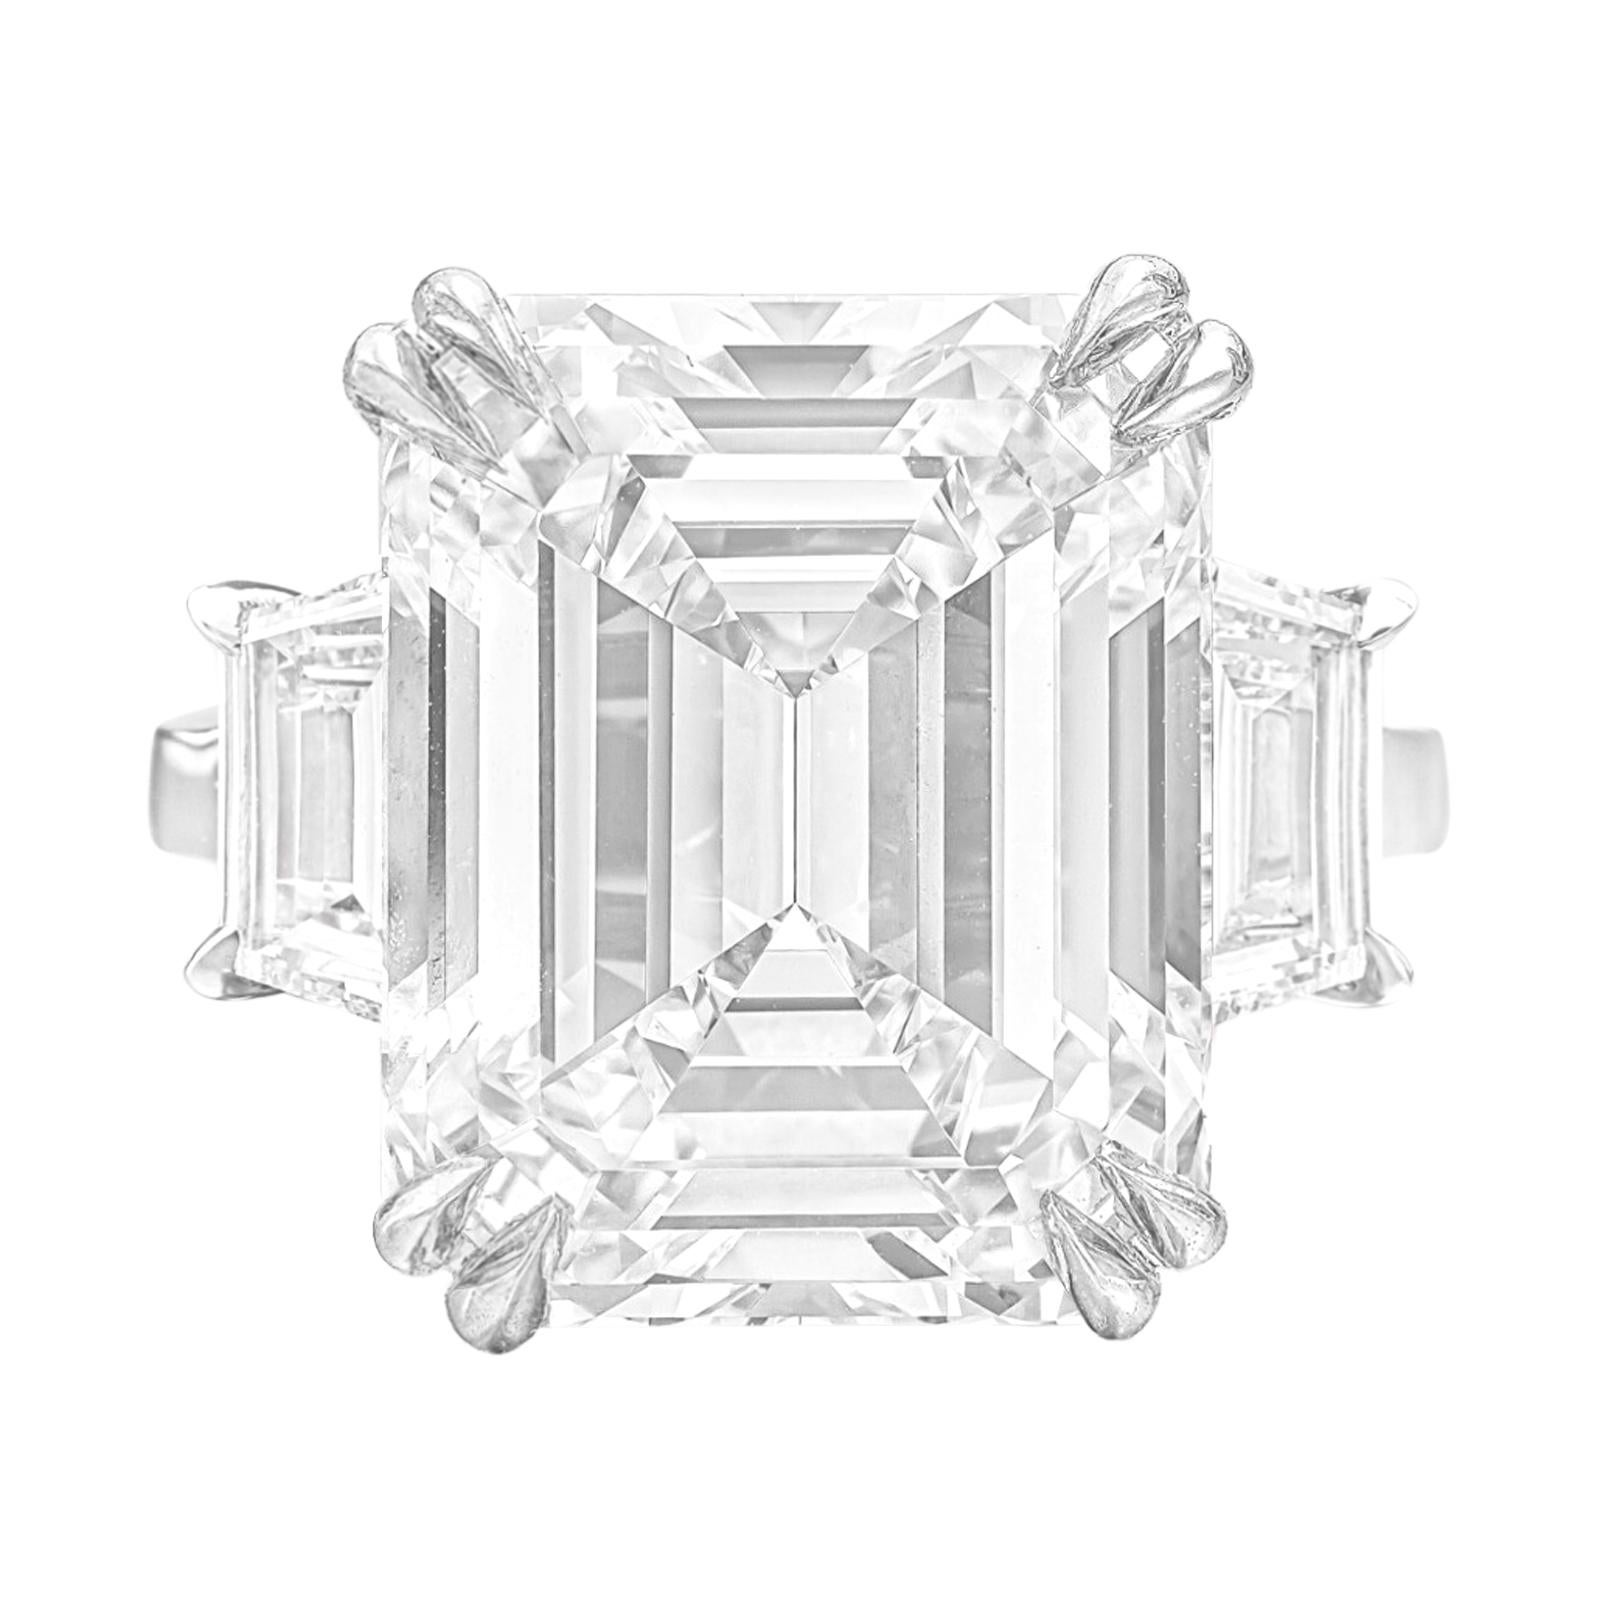 This remarkable ring showcases a breathtaking 6-carat emerald-cut diamond set gracefully in an exquisite 18-karat white gold band adorned with trapezoid-cut diamonds. The central diamond, an awe-inspiring 6-carat gem, boasts an exceptional G color